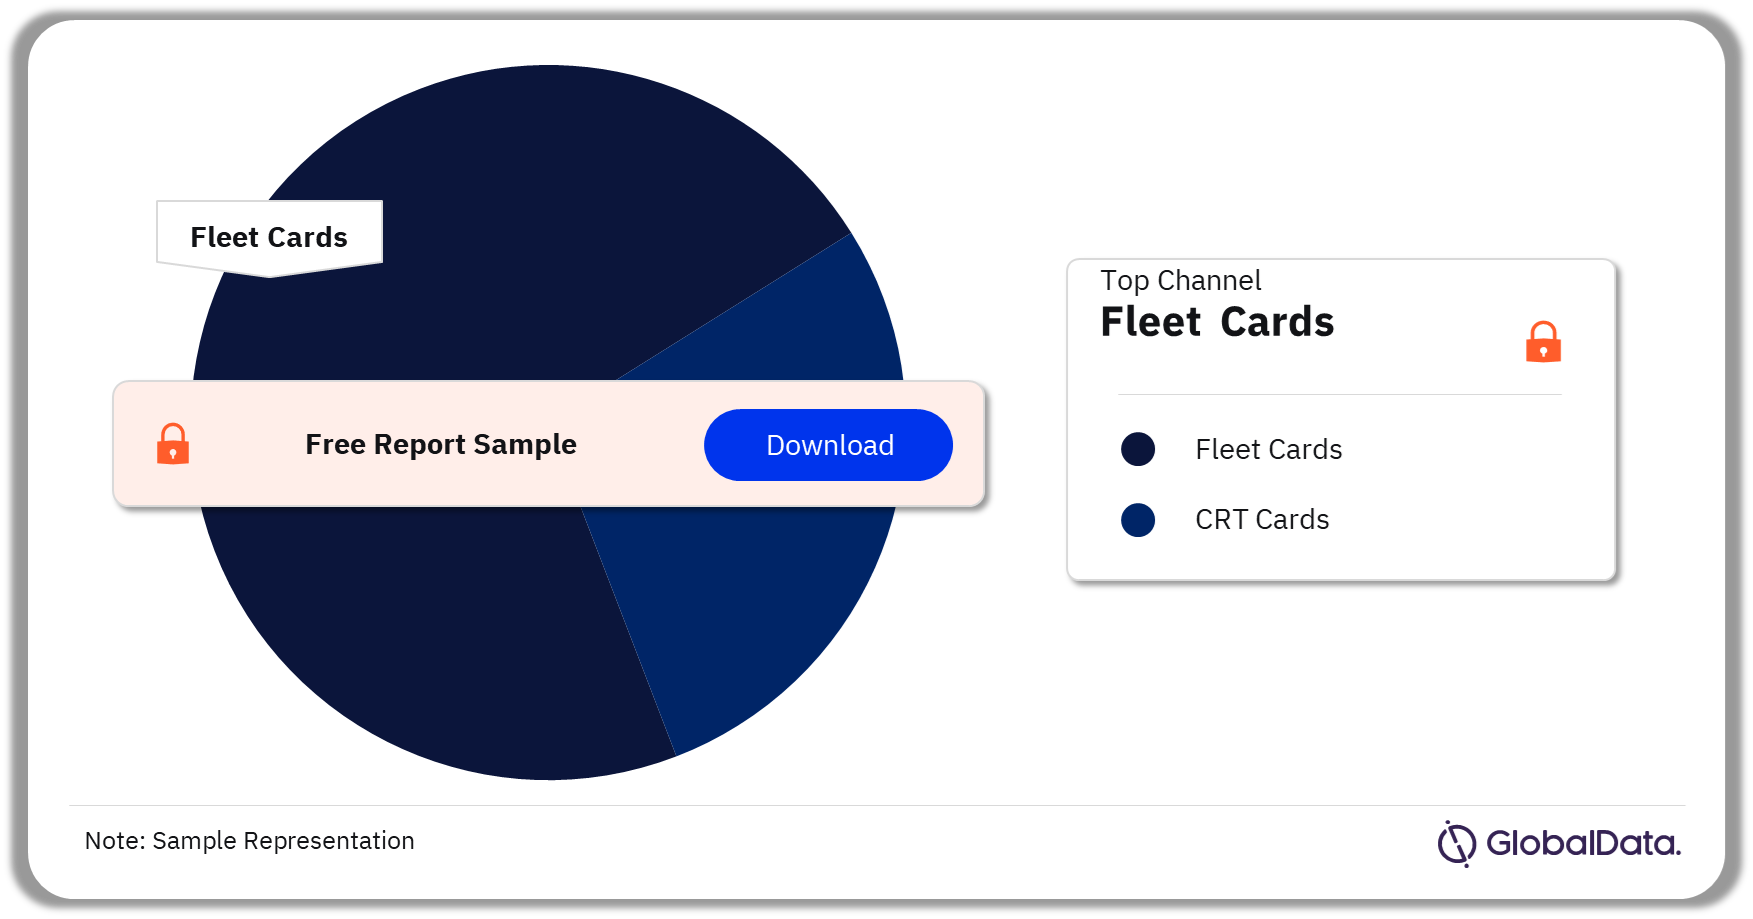 China Fuel Cards Market Analysis by Channels, 2022 (%)